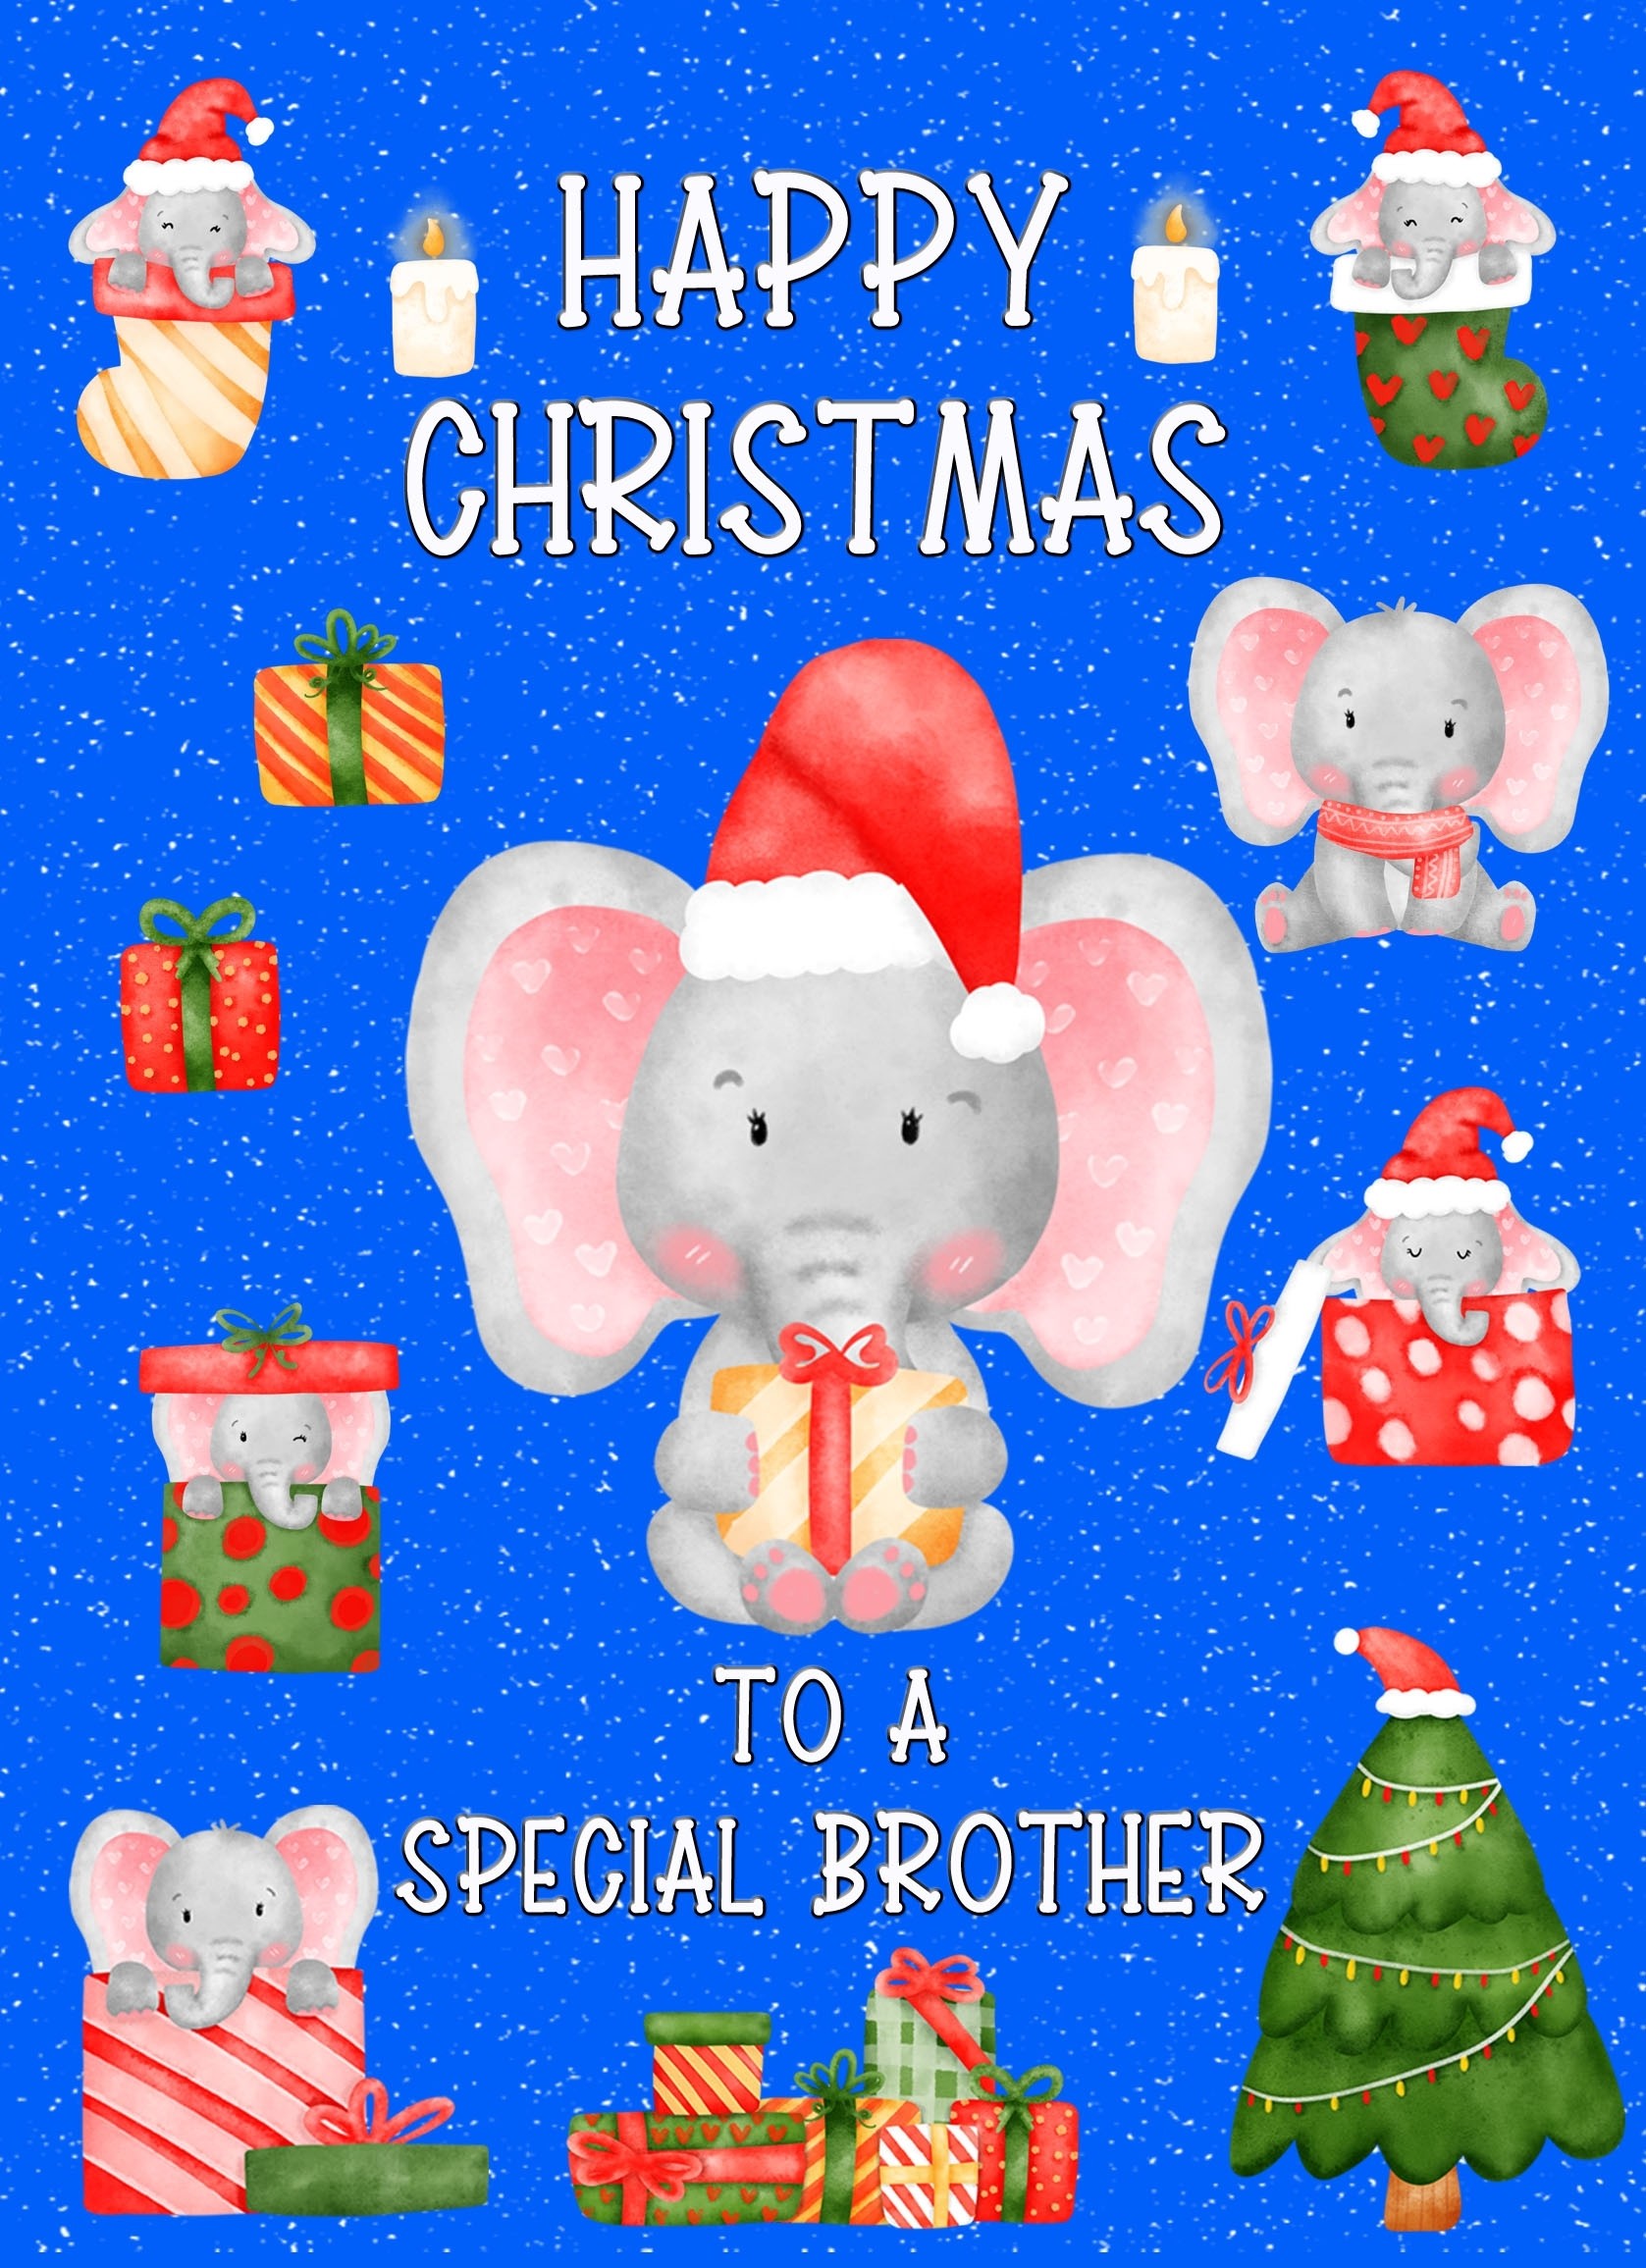 Christmas Card For Special Brother (Blue)